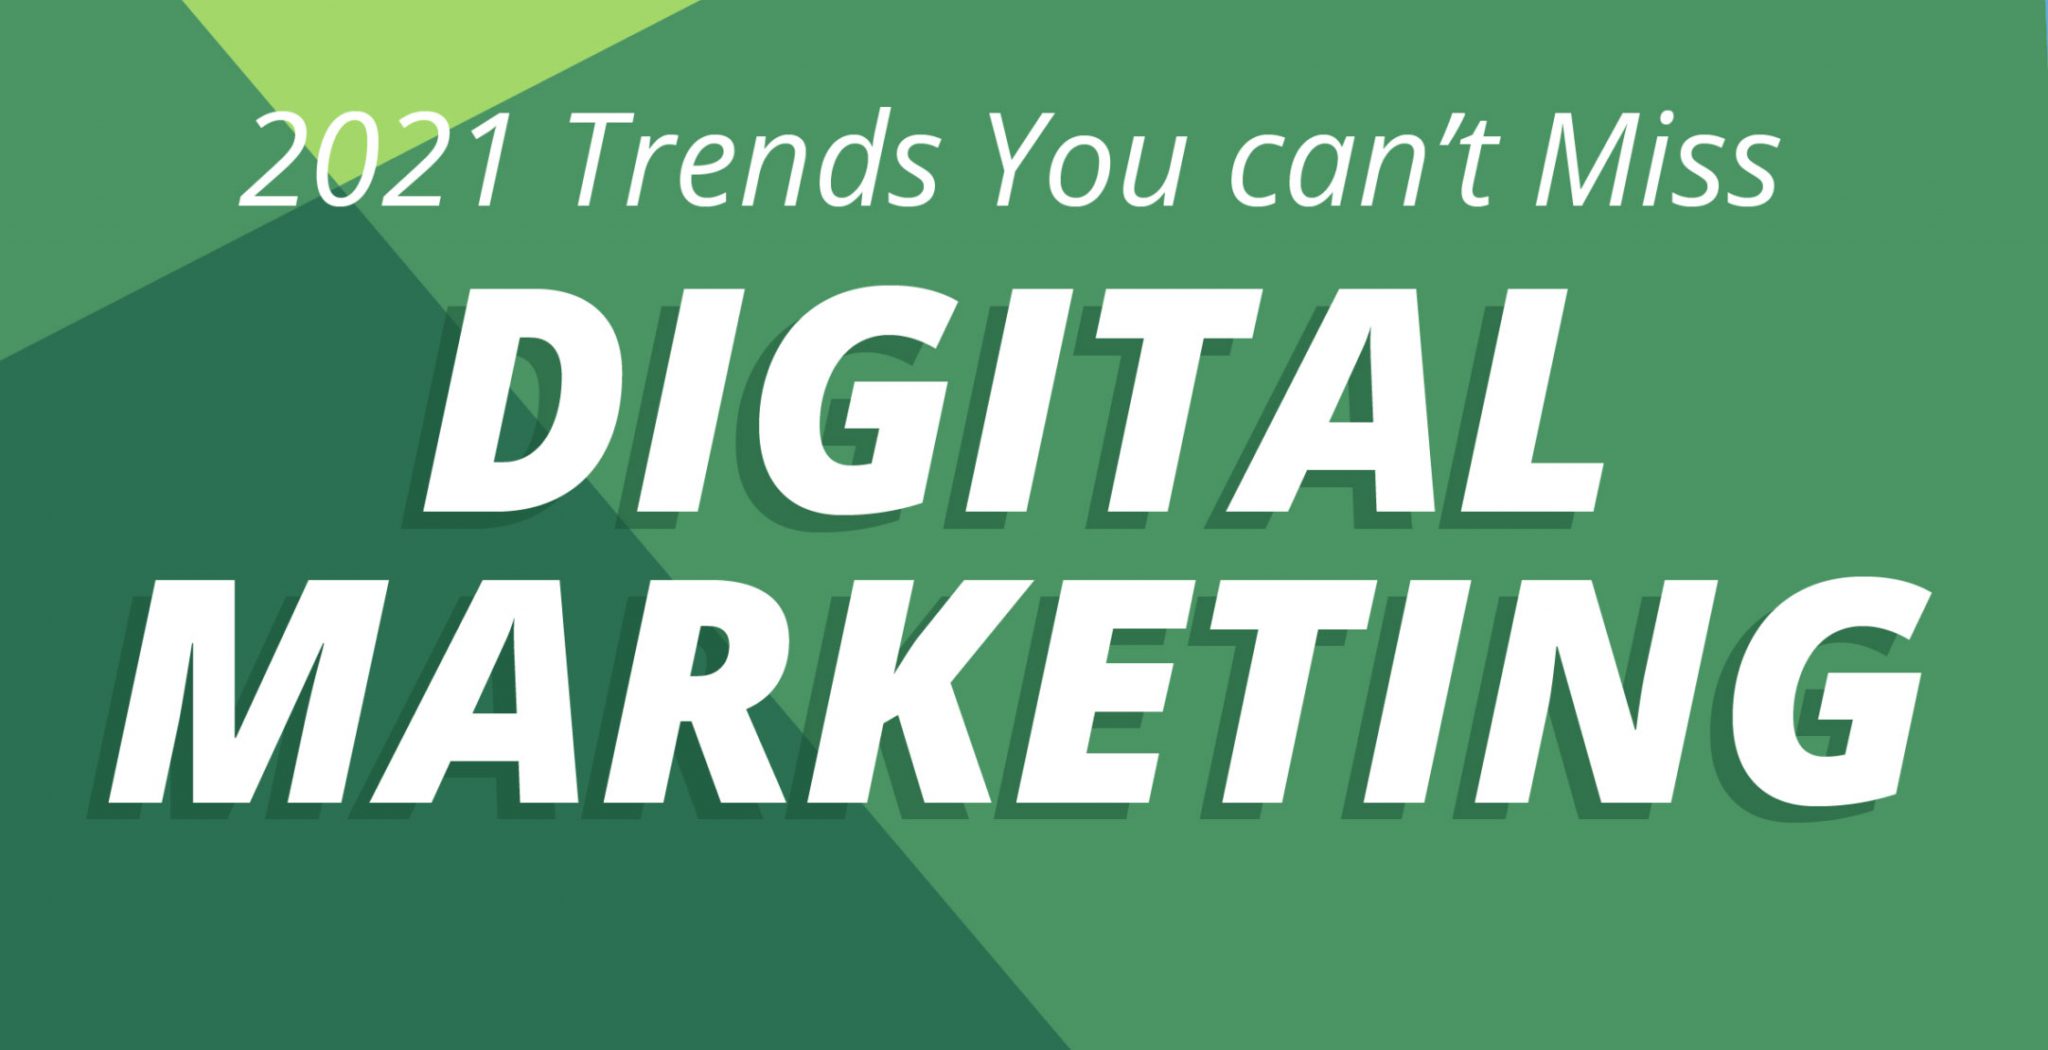 The Latest Digital Marketing Trends for 2021